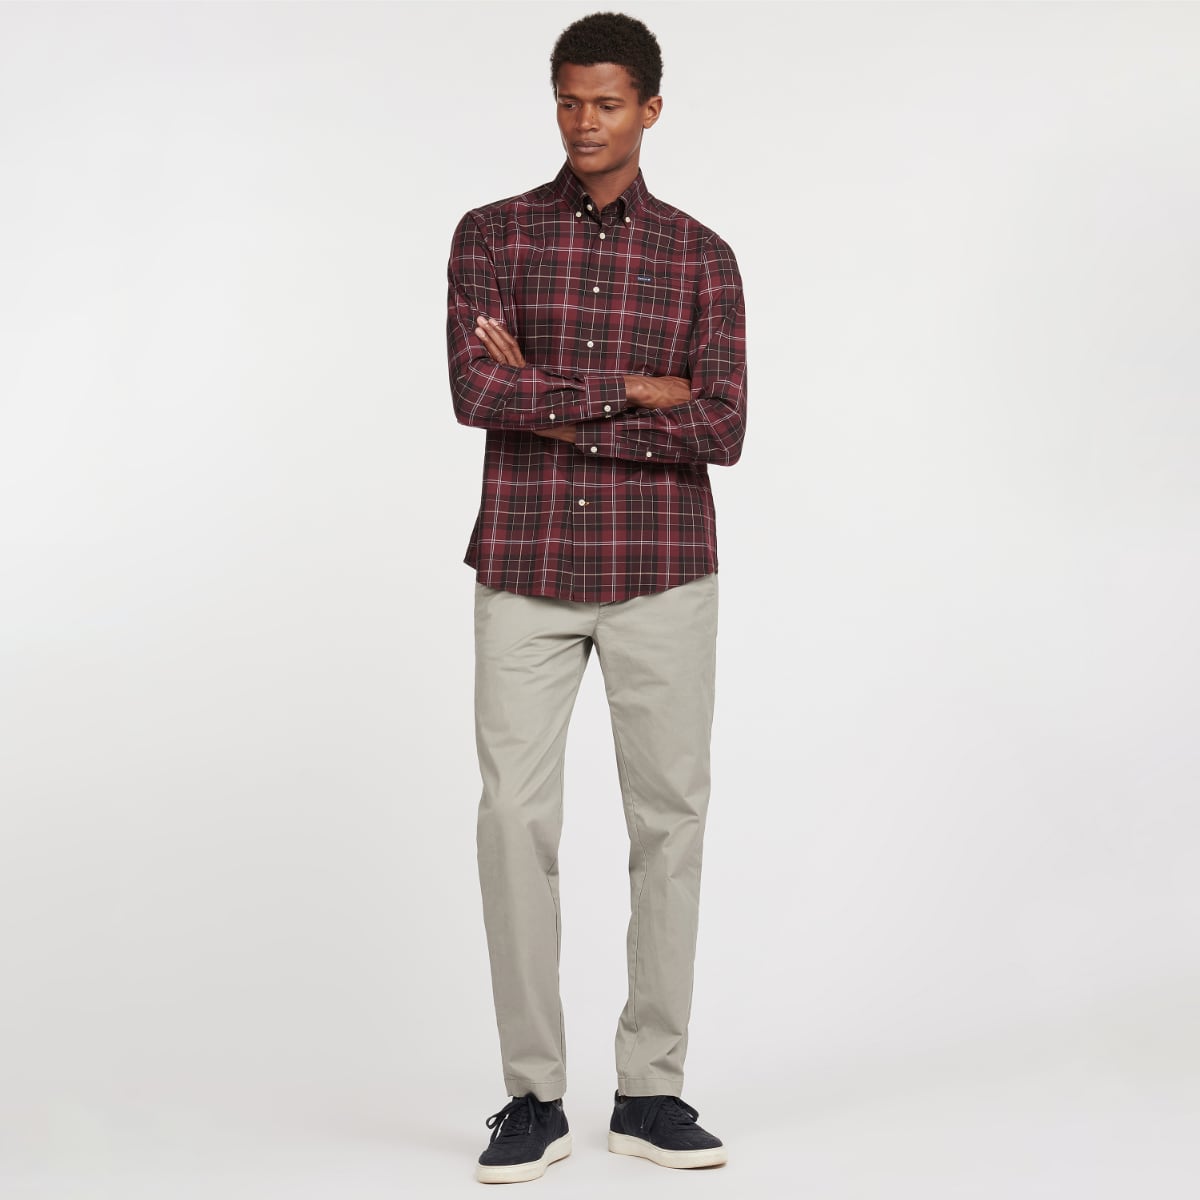 Barbour Wetheram Tailored Fit Men's Shirt | Winter Red